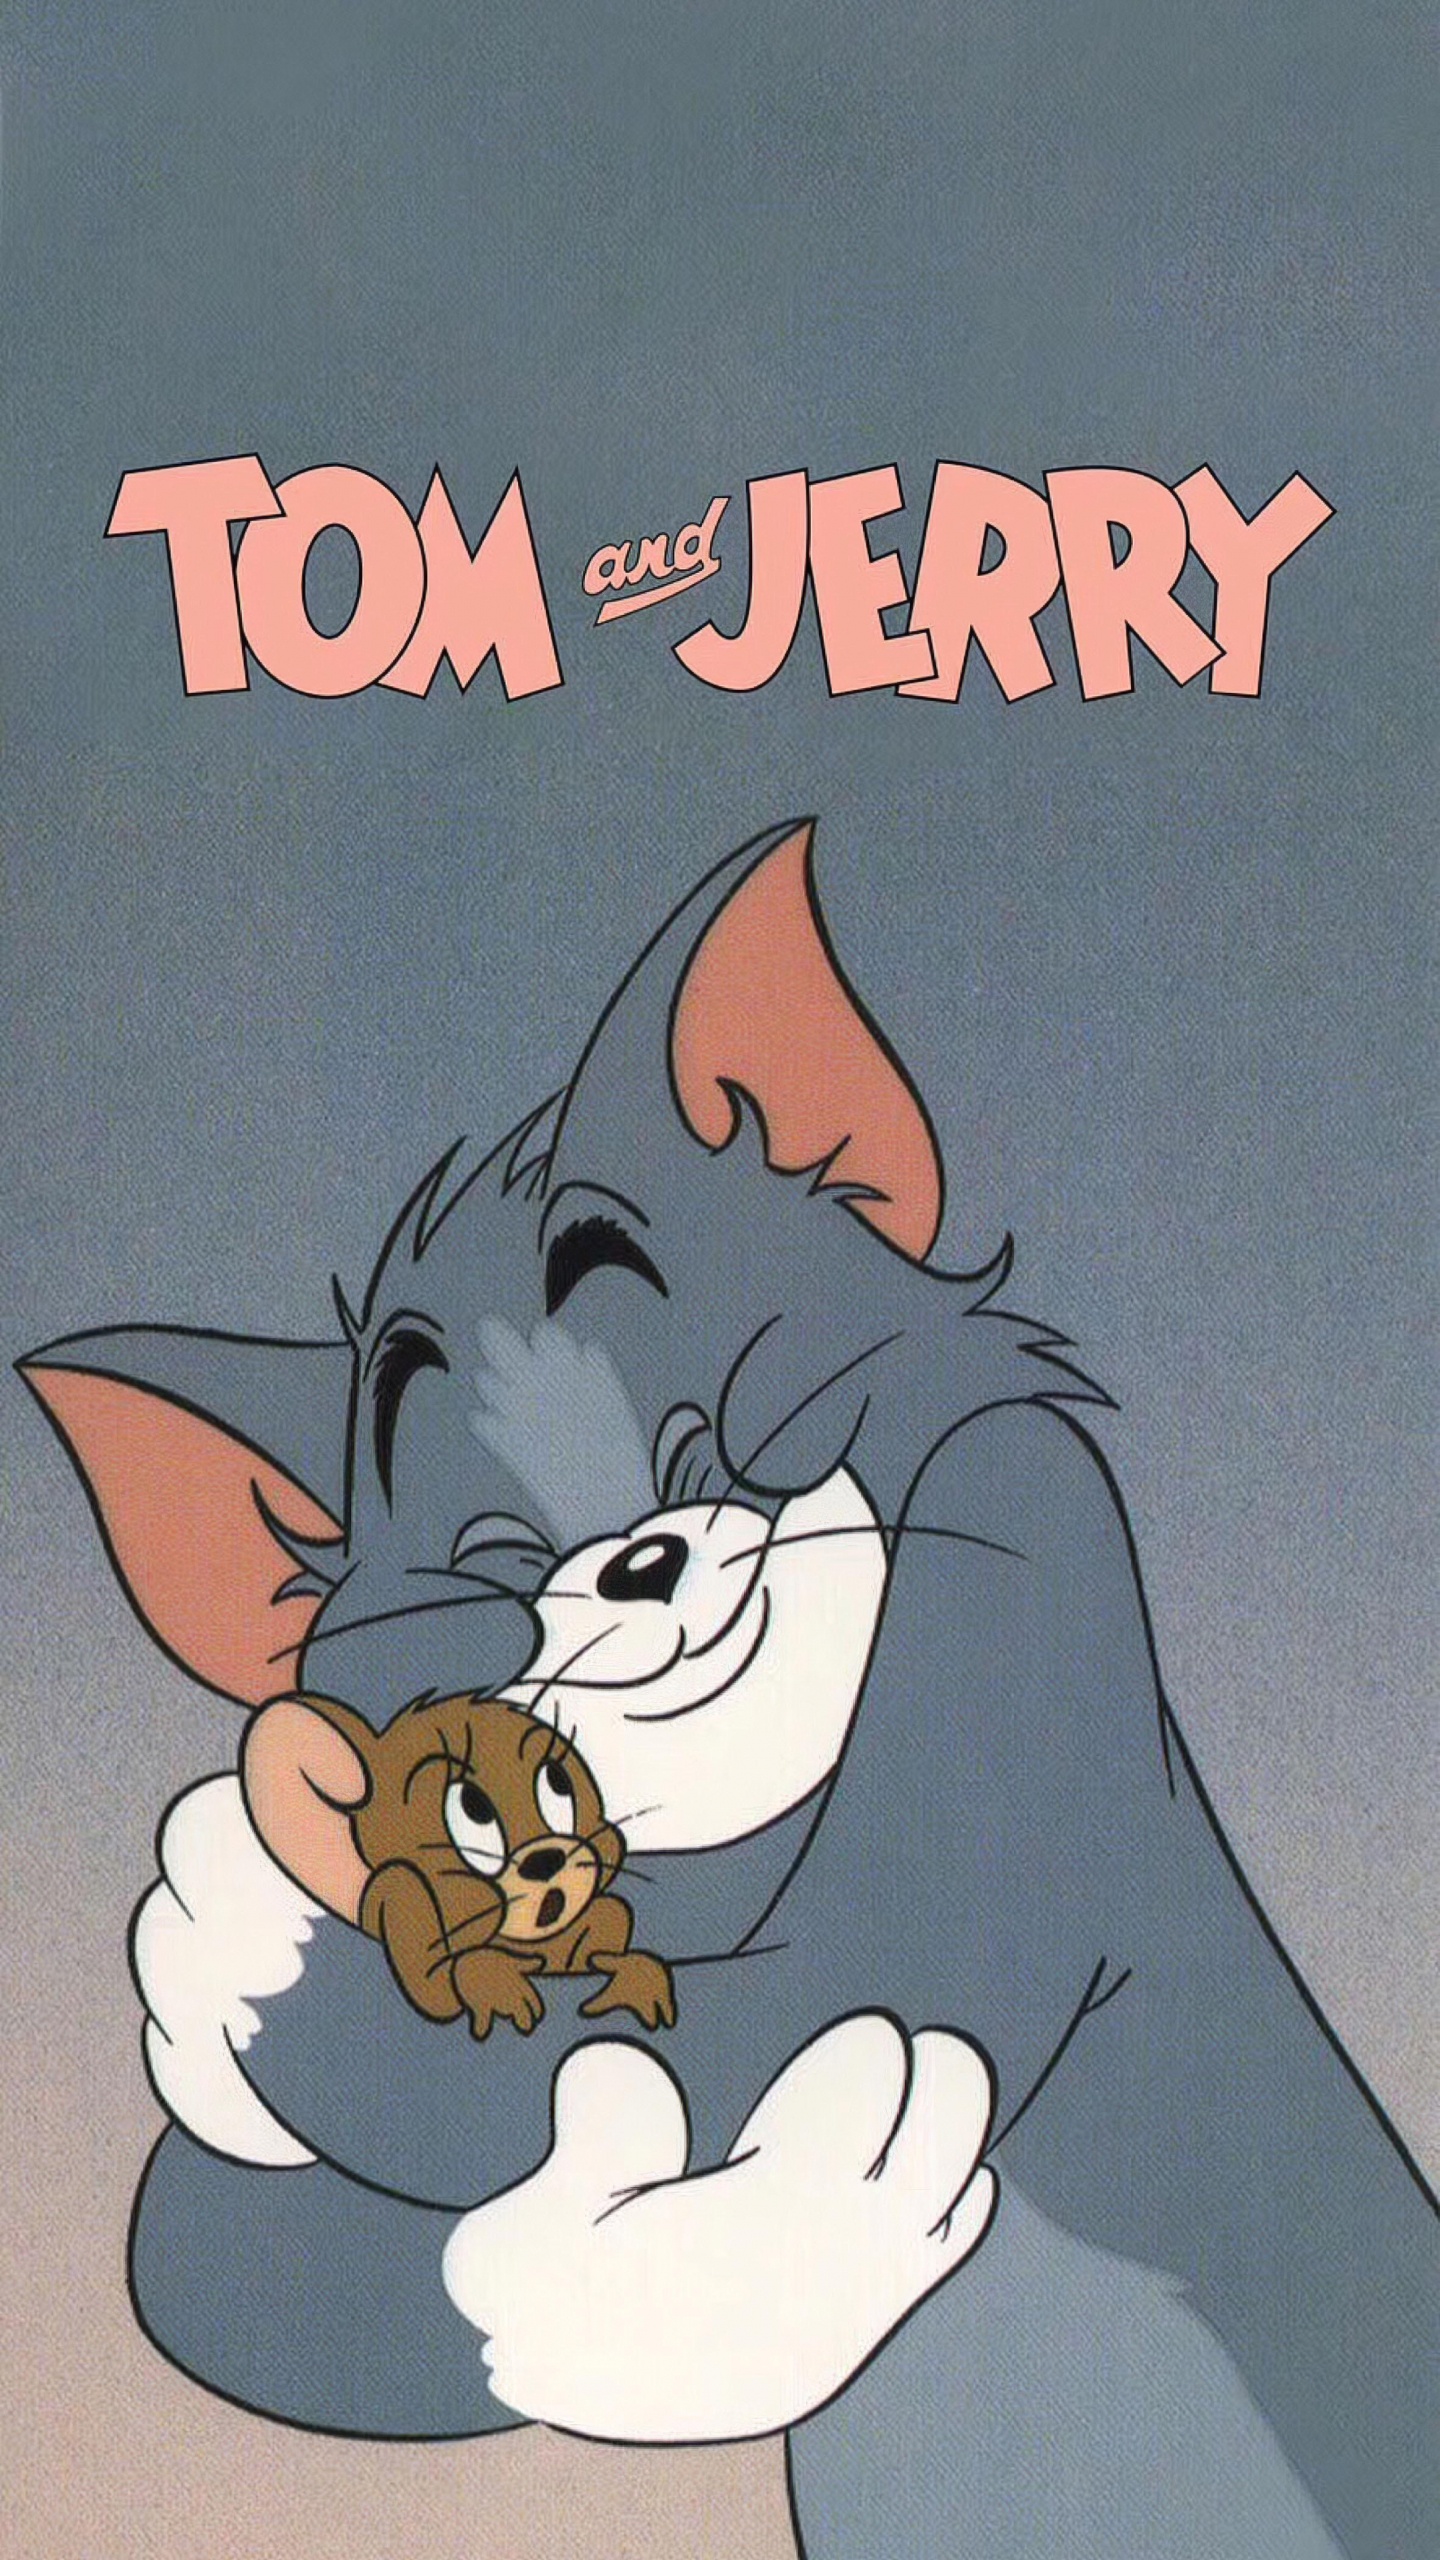 Tom and Jerry Aesthetic, Tom Cat, Jerry Mouse, Aesthetics, Cartoon. Wallpaper in 1440x2560 Resolution